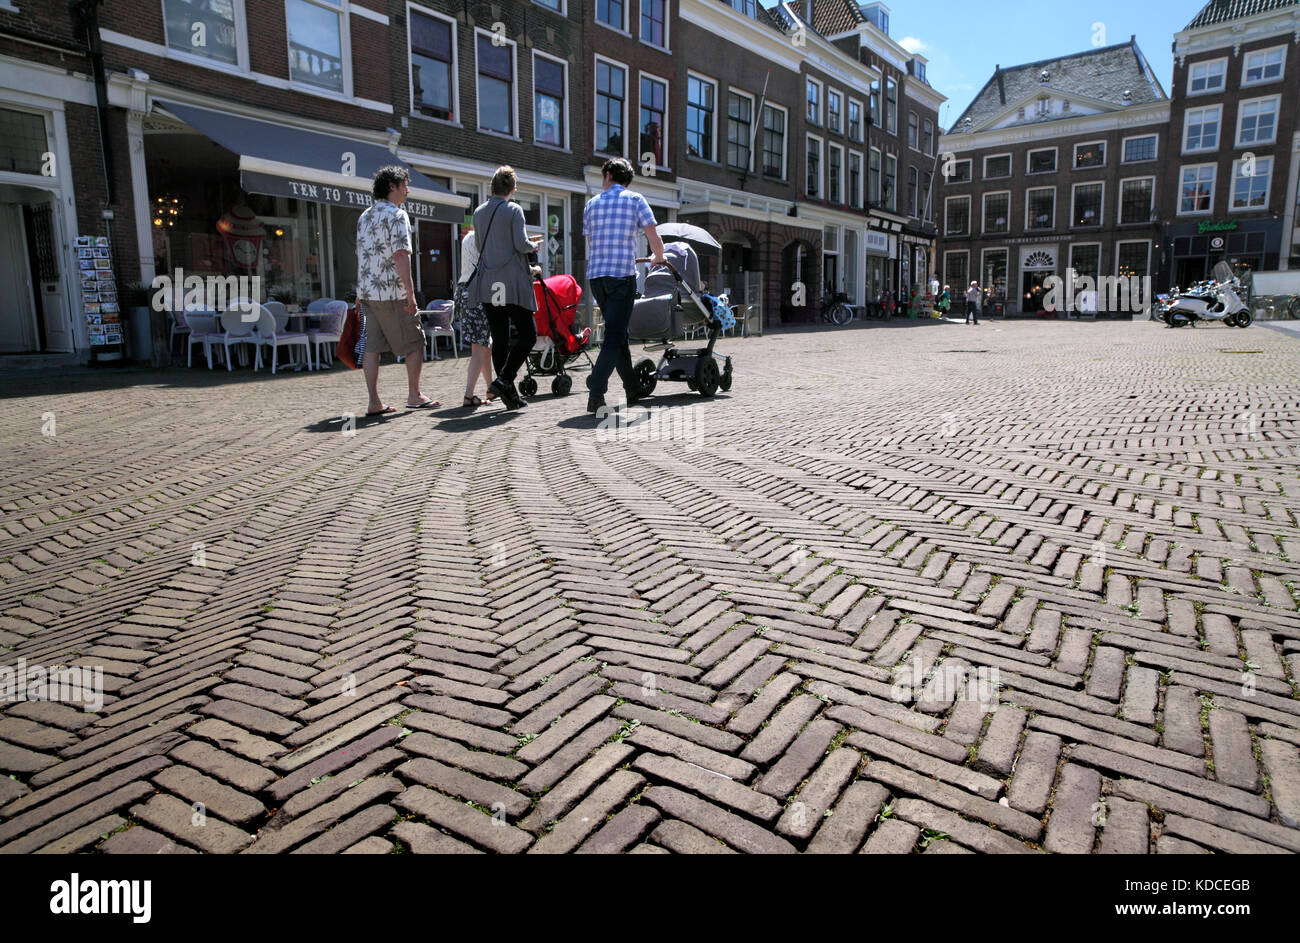 Red brick paving with a herringbone pattern in Delft's pedestrianised Market Square. Stock Photo